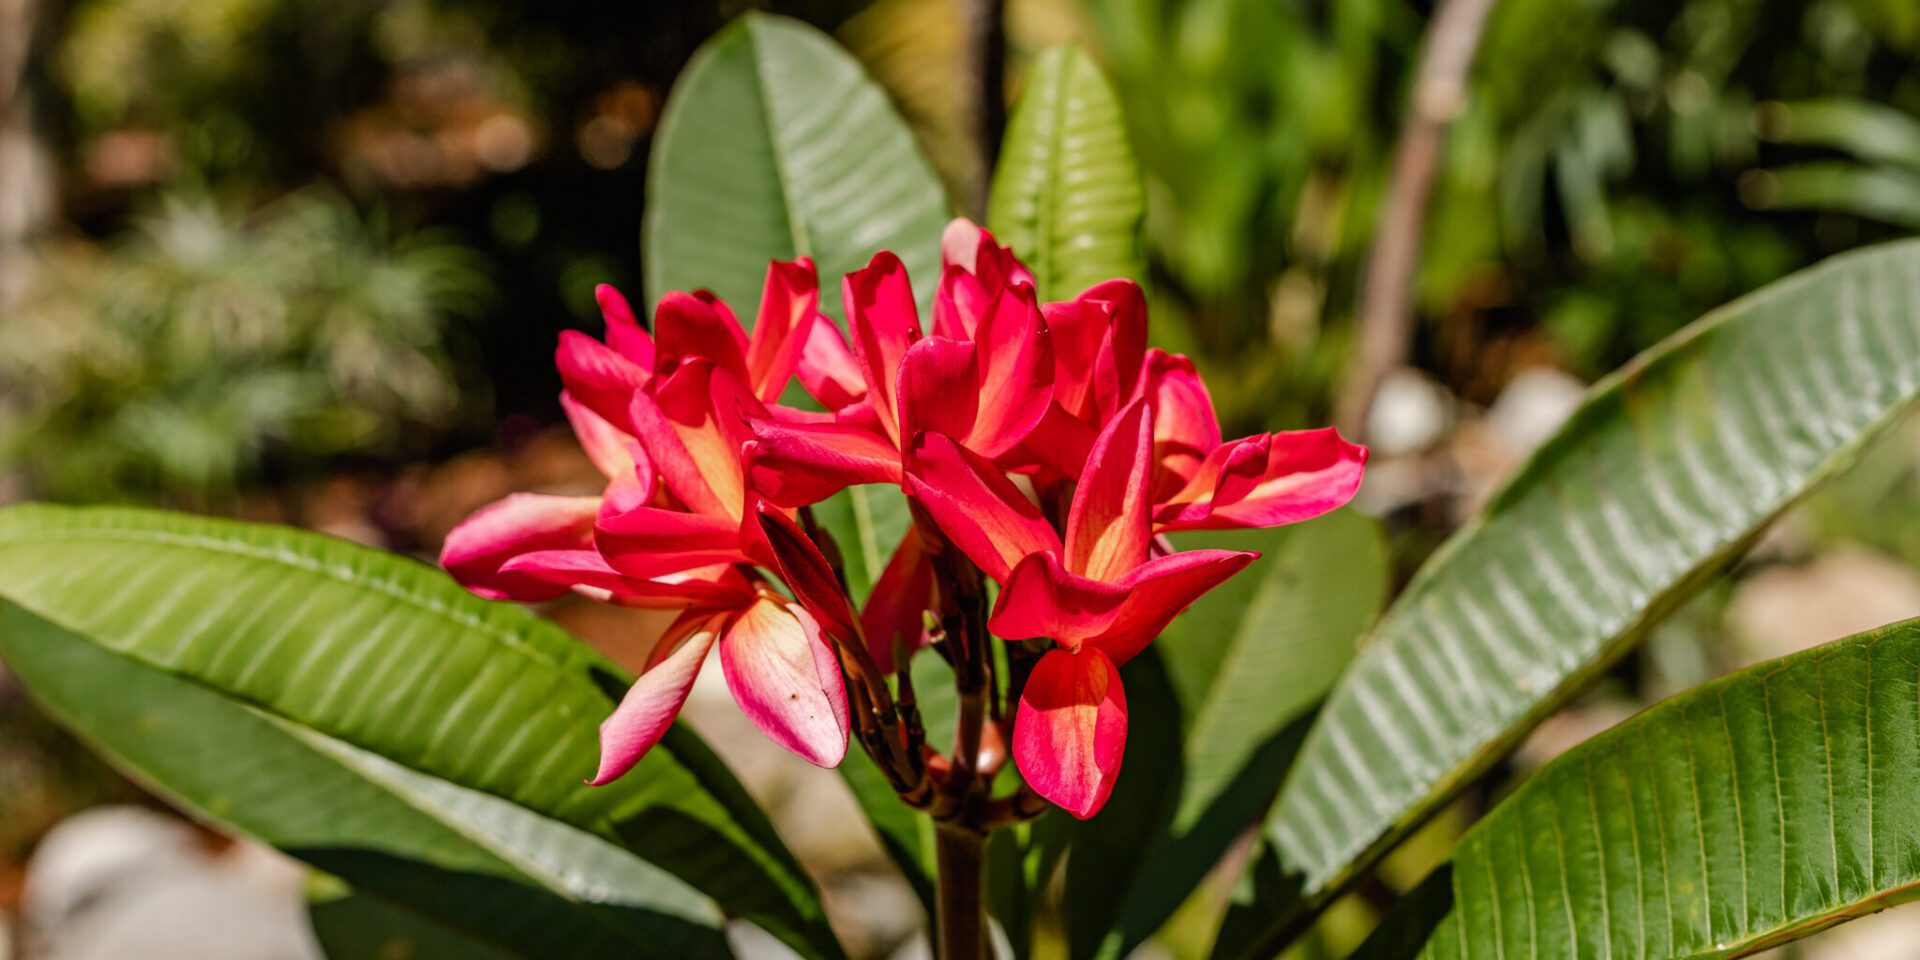 A plant with red flowers with green leaves